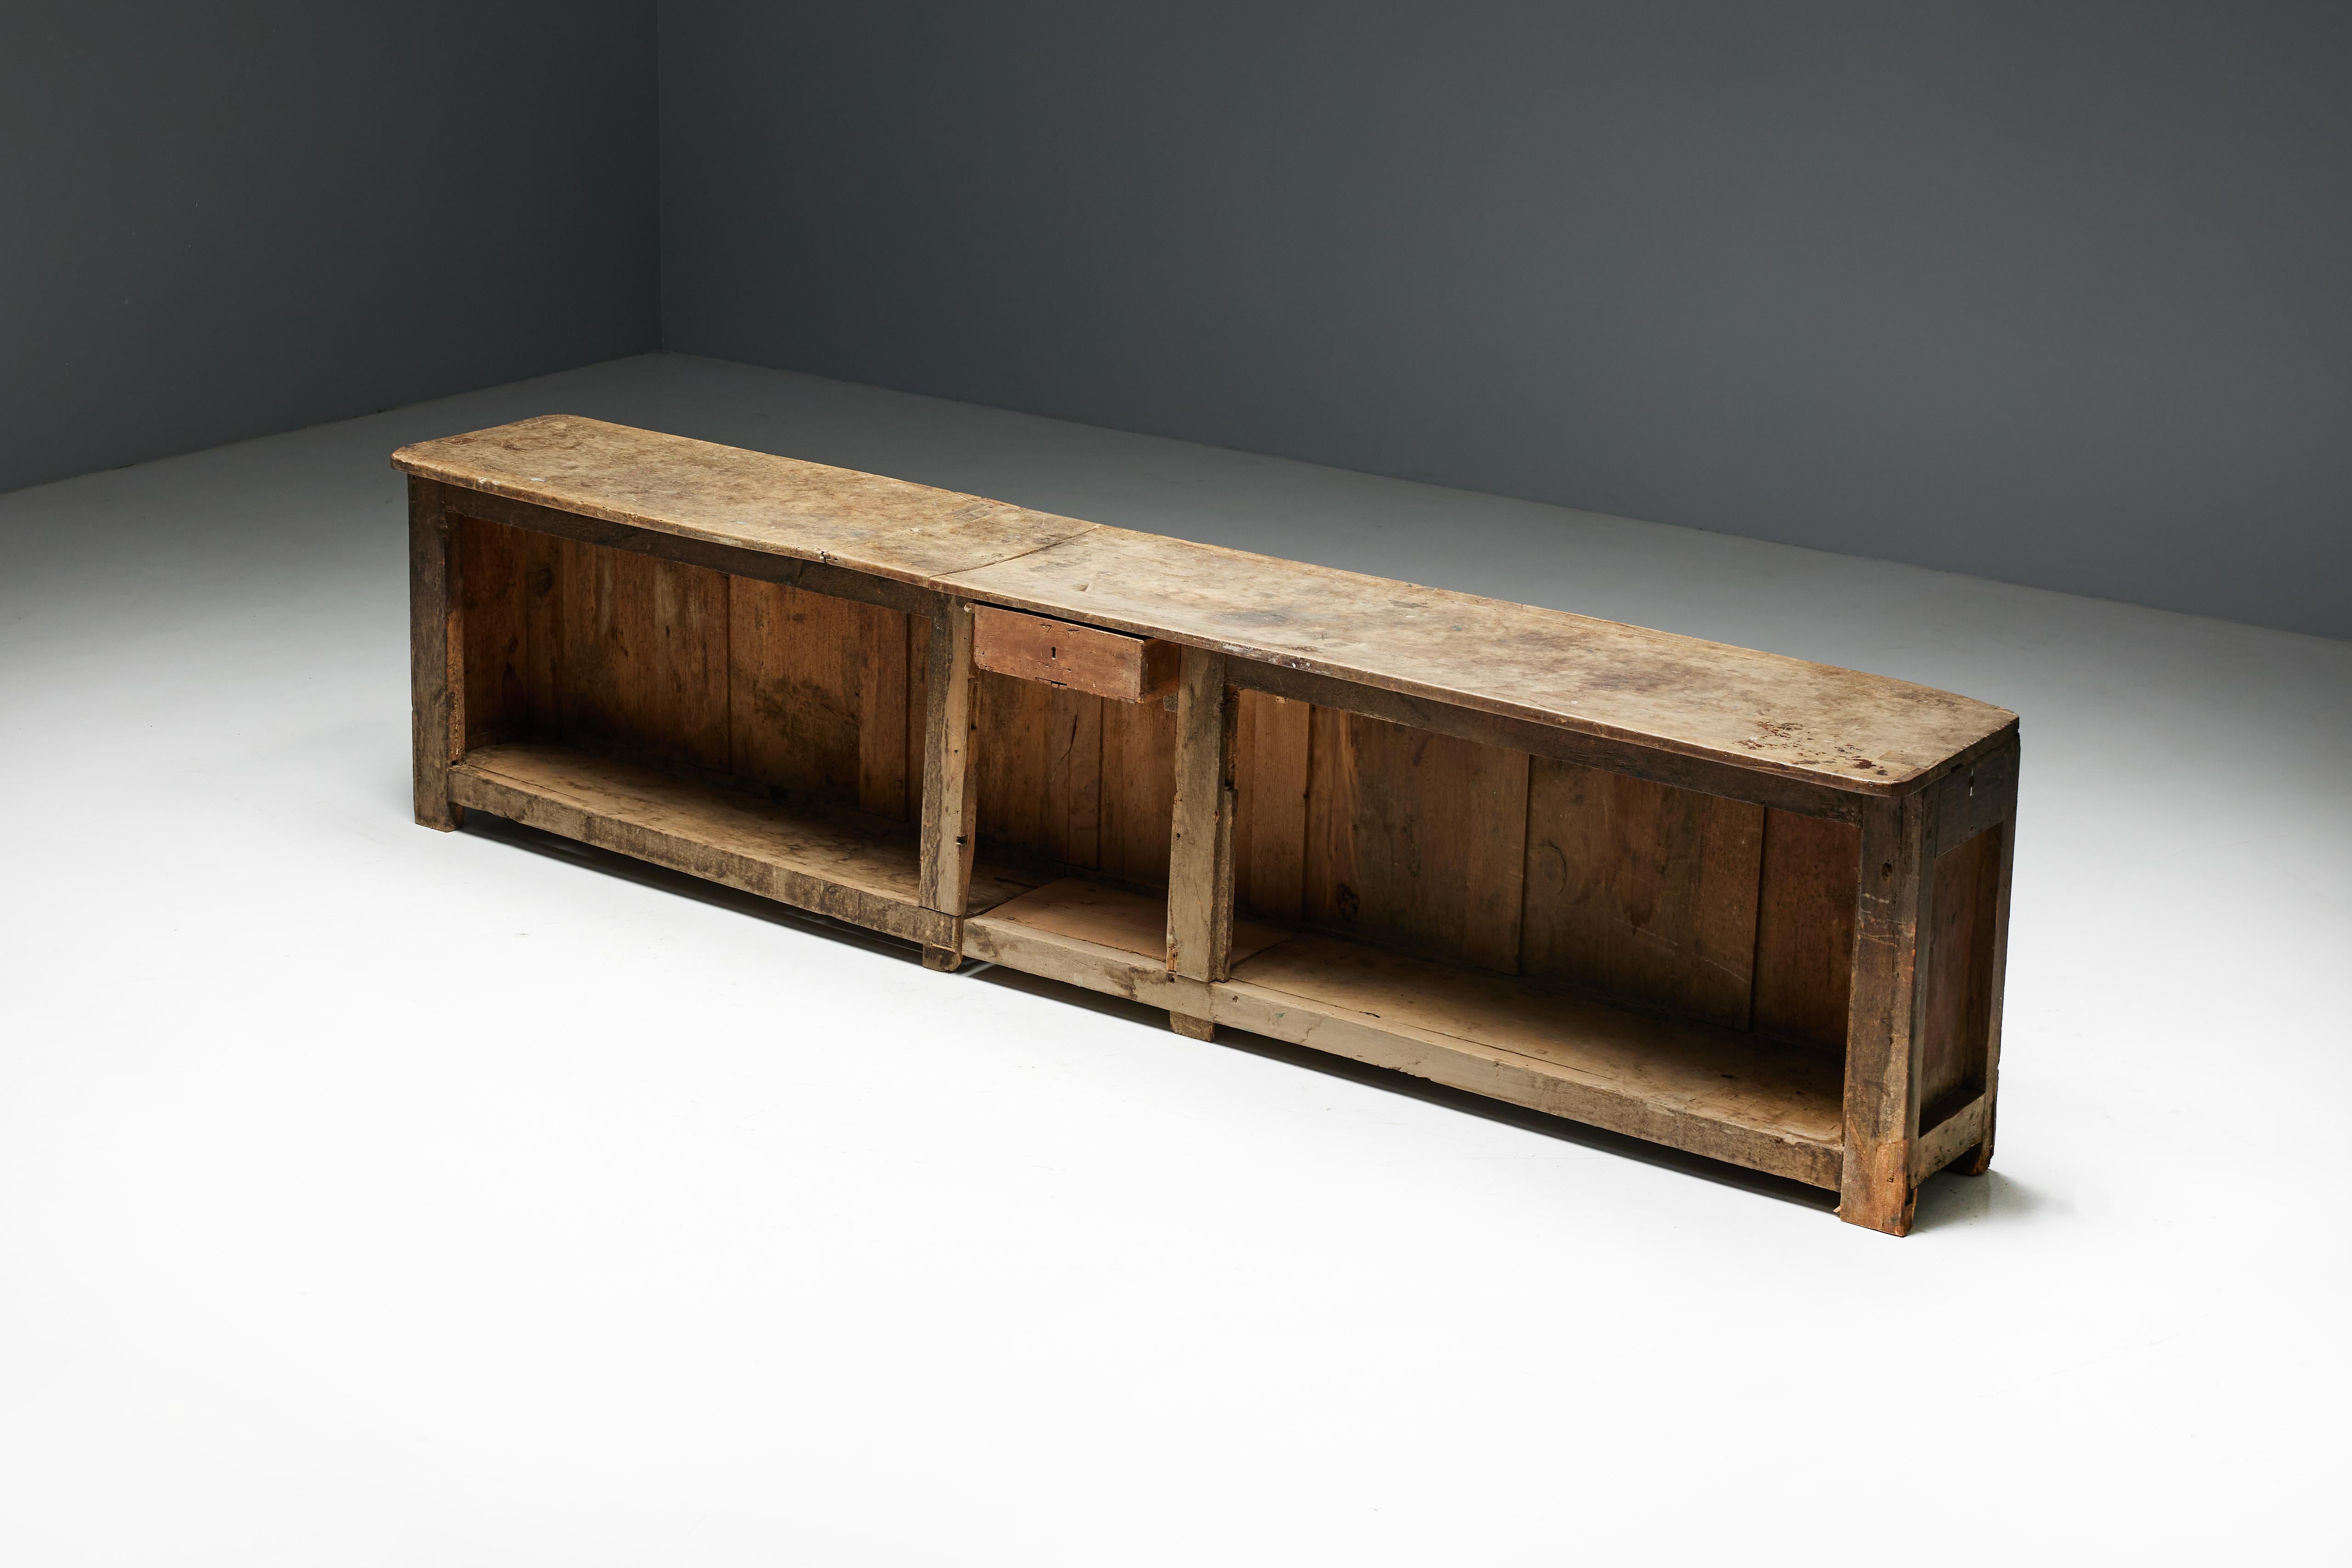 French Rustic Art Populaire Freestanding Bar Counter, France, 19th Century For Sale